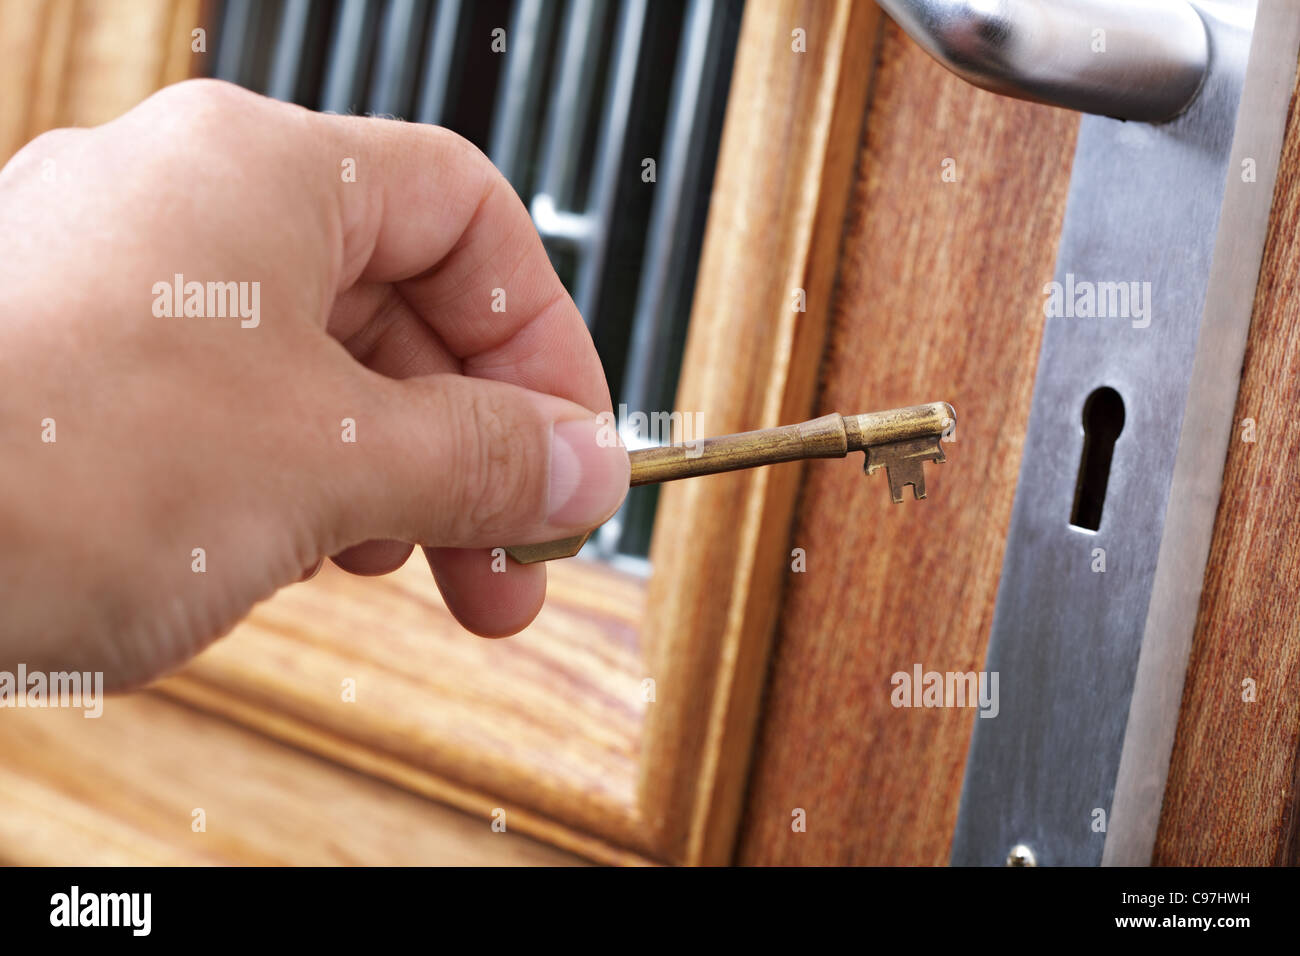 Unlocking a door with a house key Stock Photo